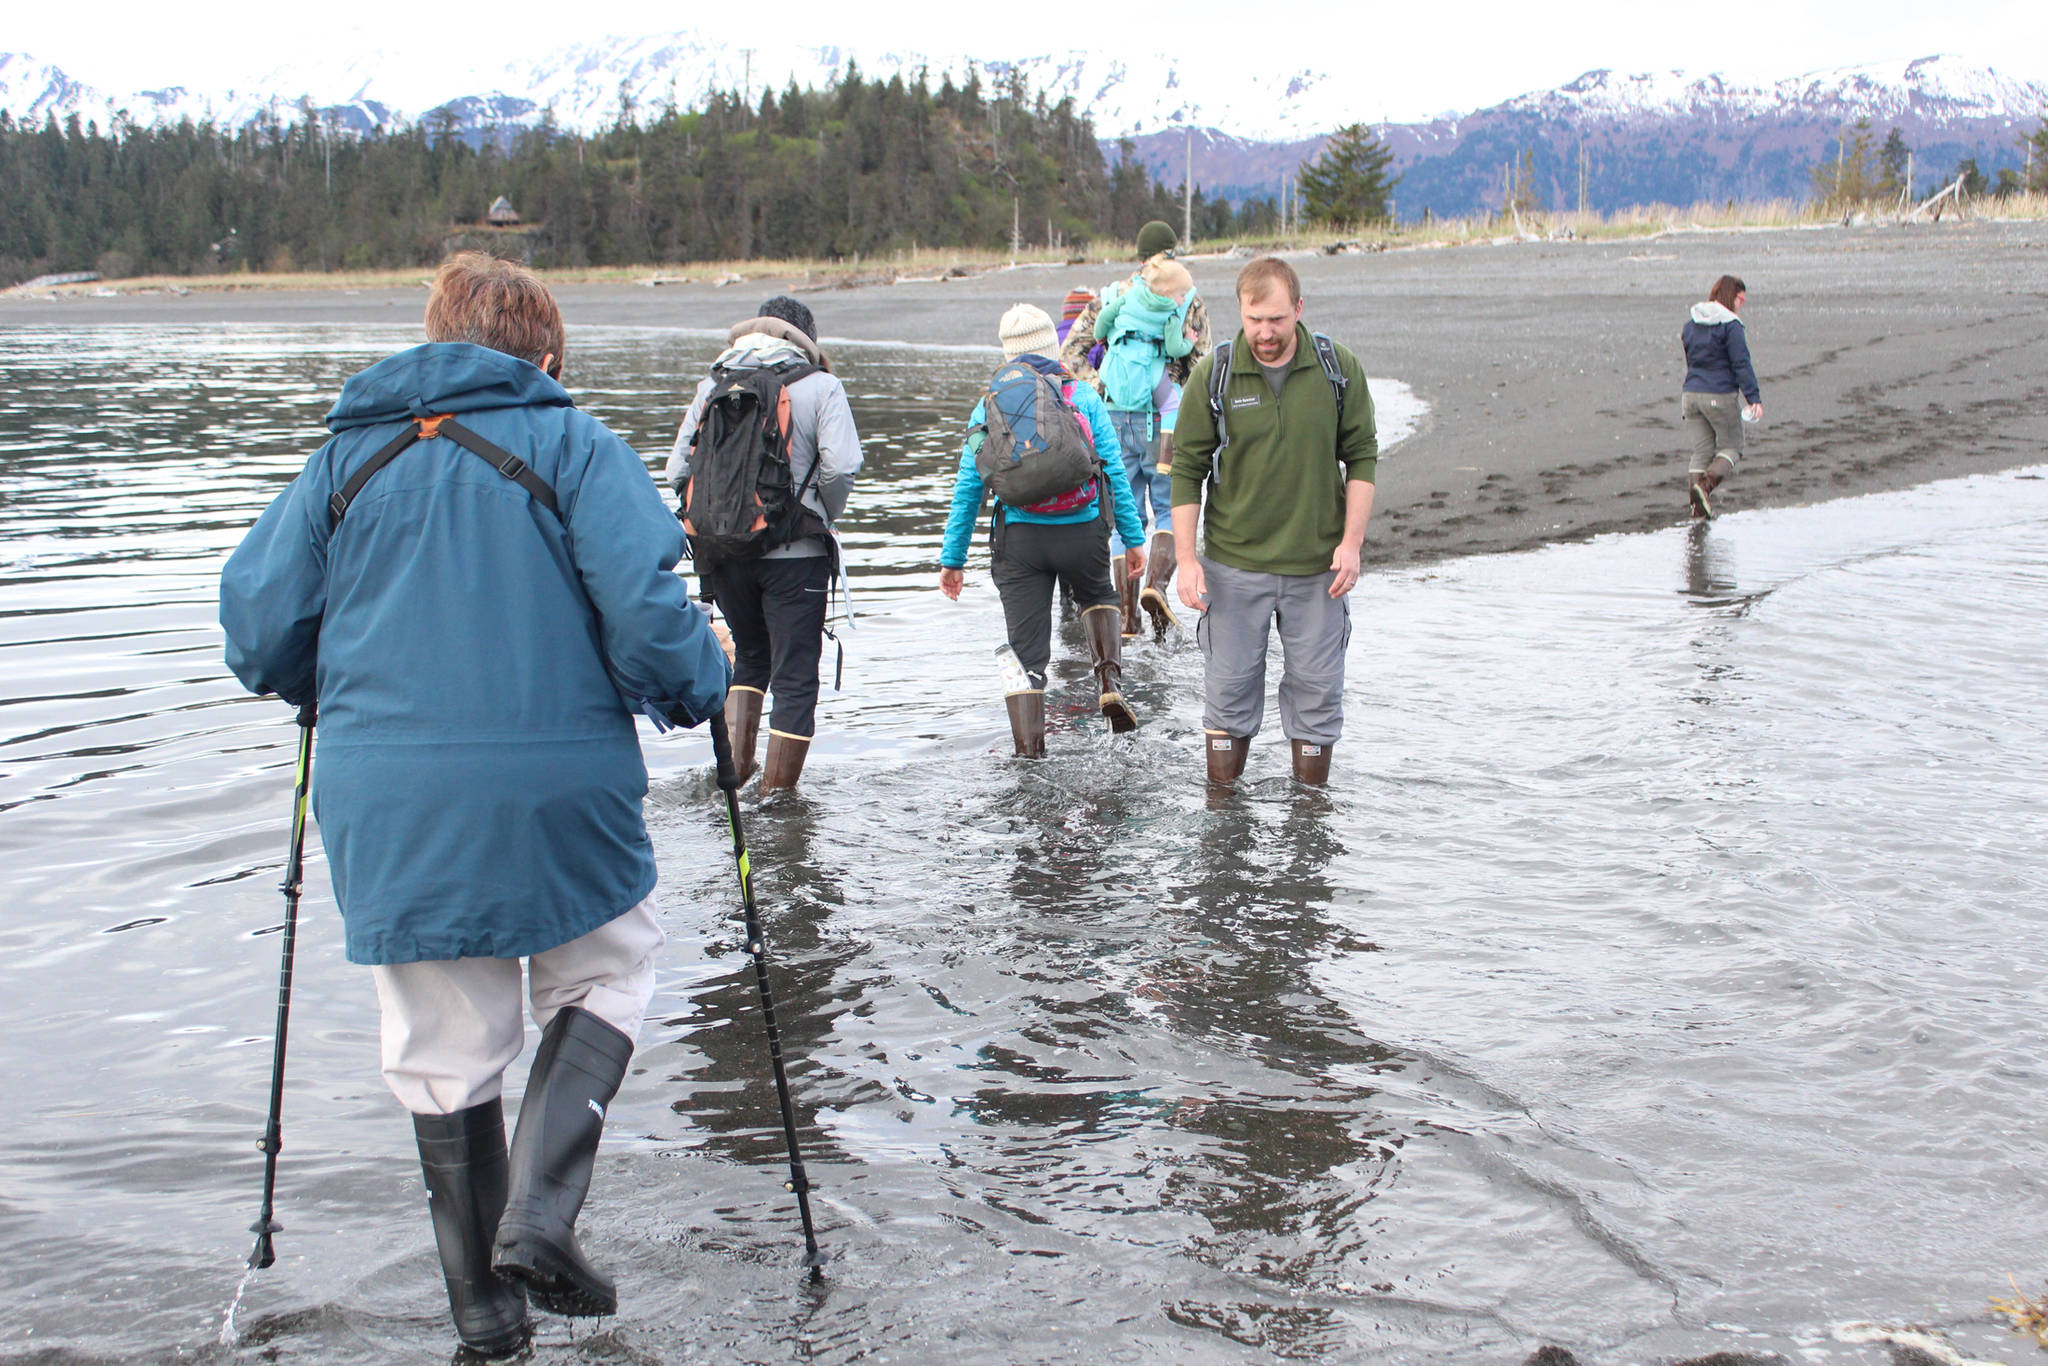 Photo by Megan Pacer/Homer News Seth Spencer, the education programs coordinator for Center for Alaskan Coastal Studies, guides visitors across an incoming tide as the walk from Otter Island to the main beach at Peterson Bay during a preview tour Thursday, May 24 near Homer.